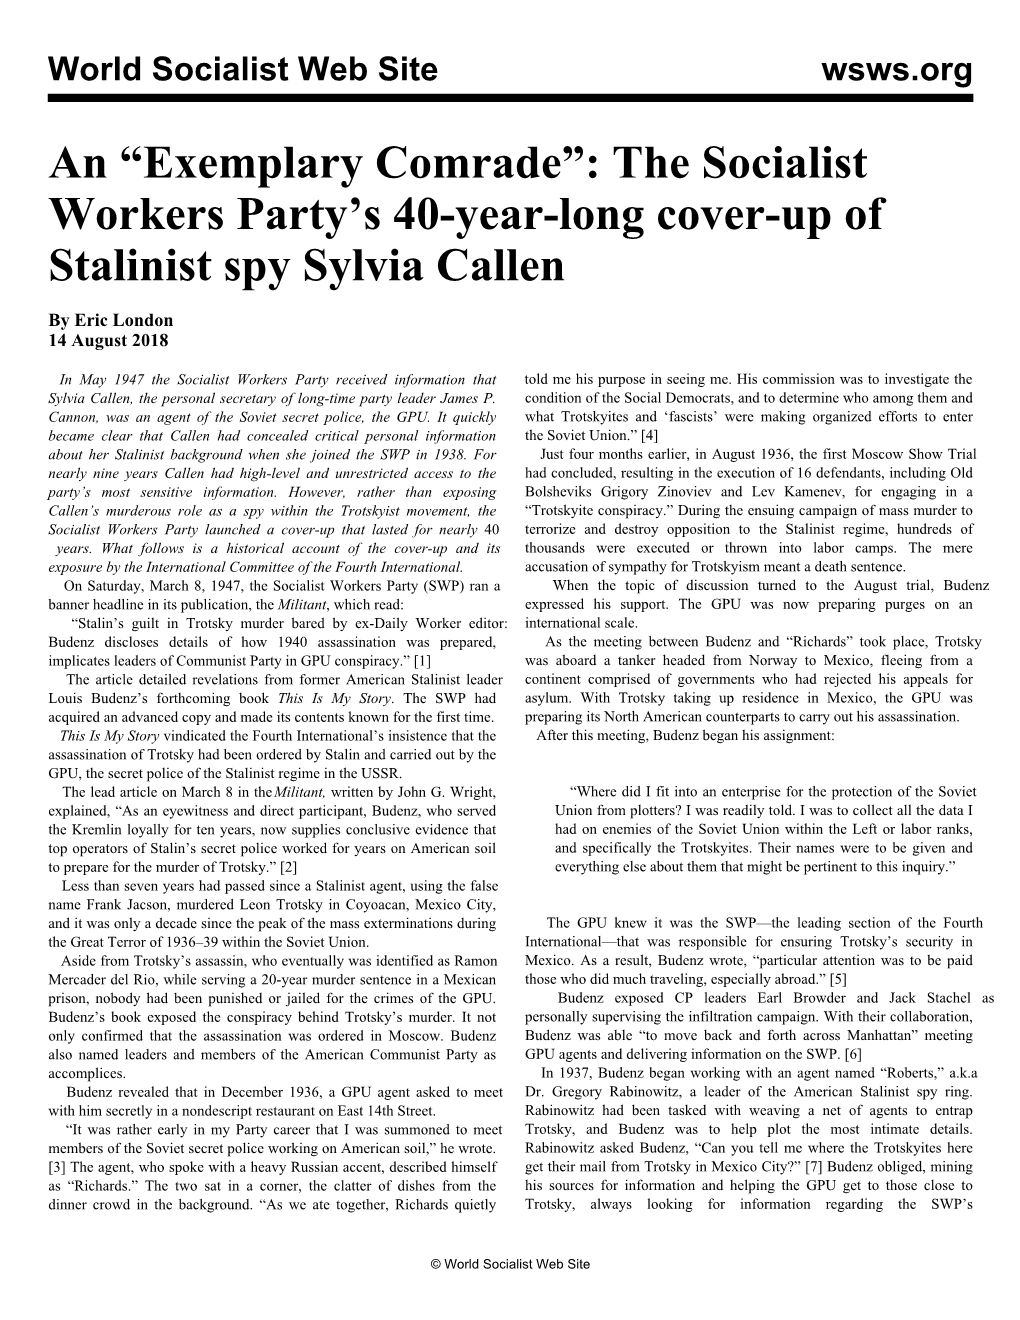 The Socialist Workers Party's 40-Year-Long Cover-Up of Stalinist